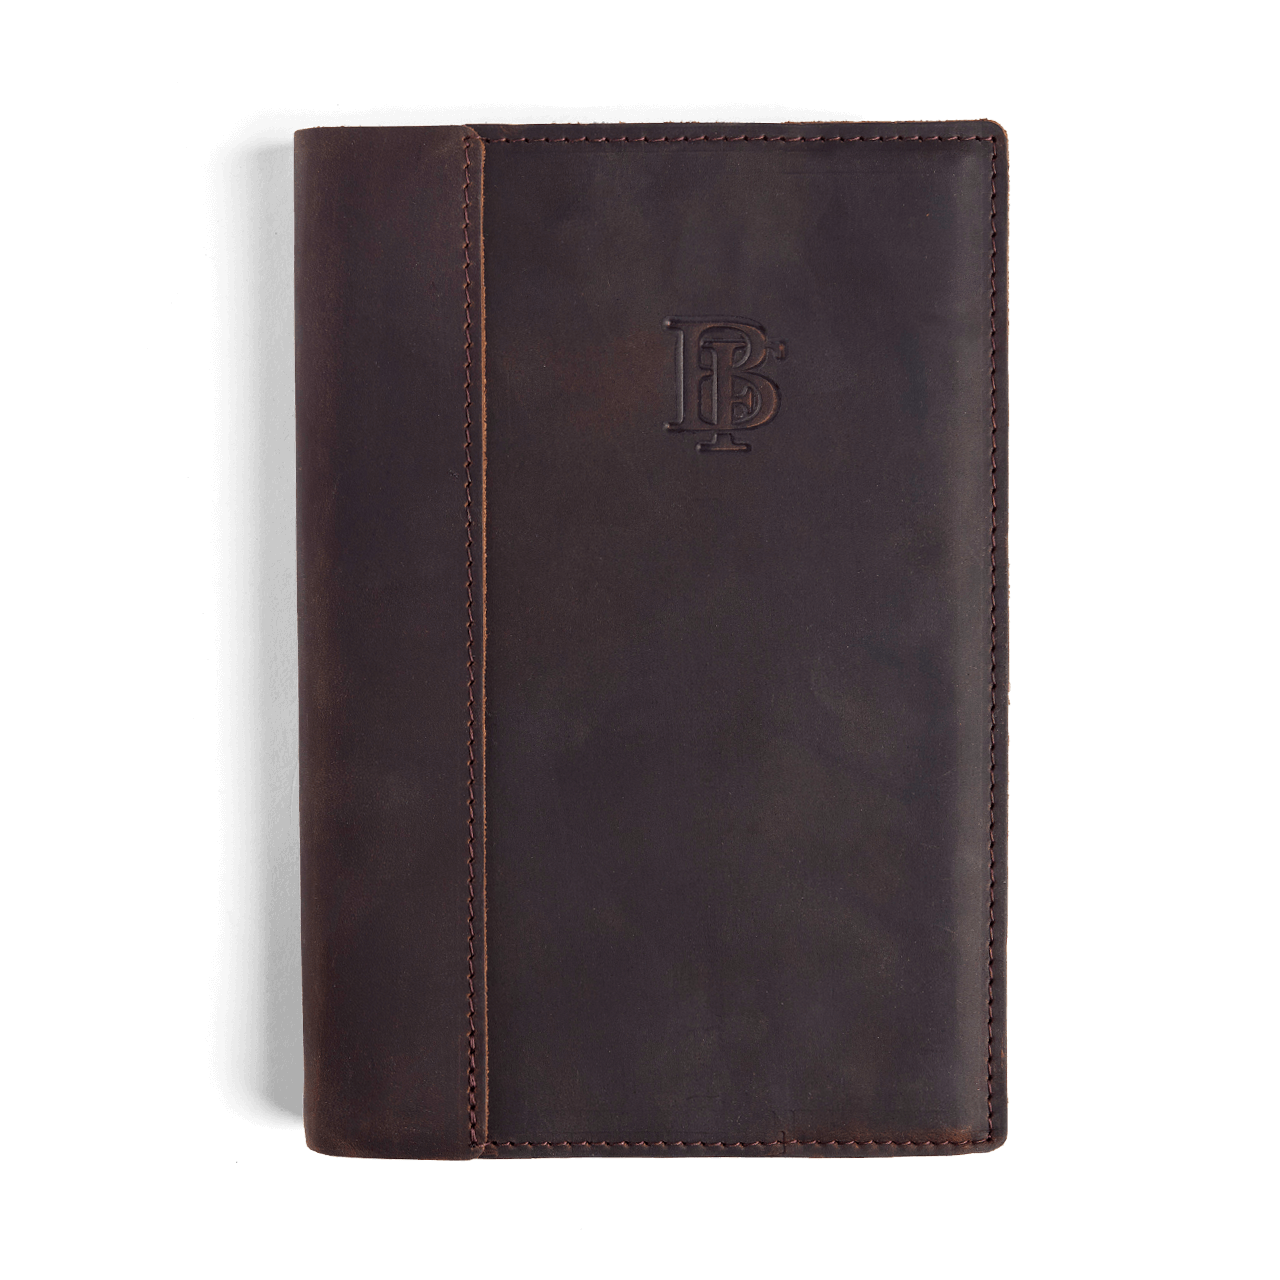  Selarde Thermo Leather Hard Cover Sketch Book, Black